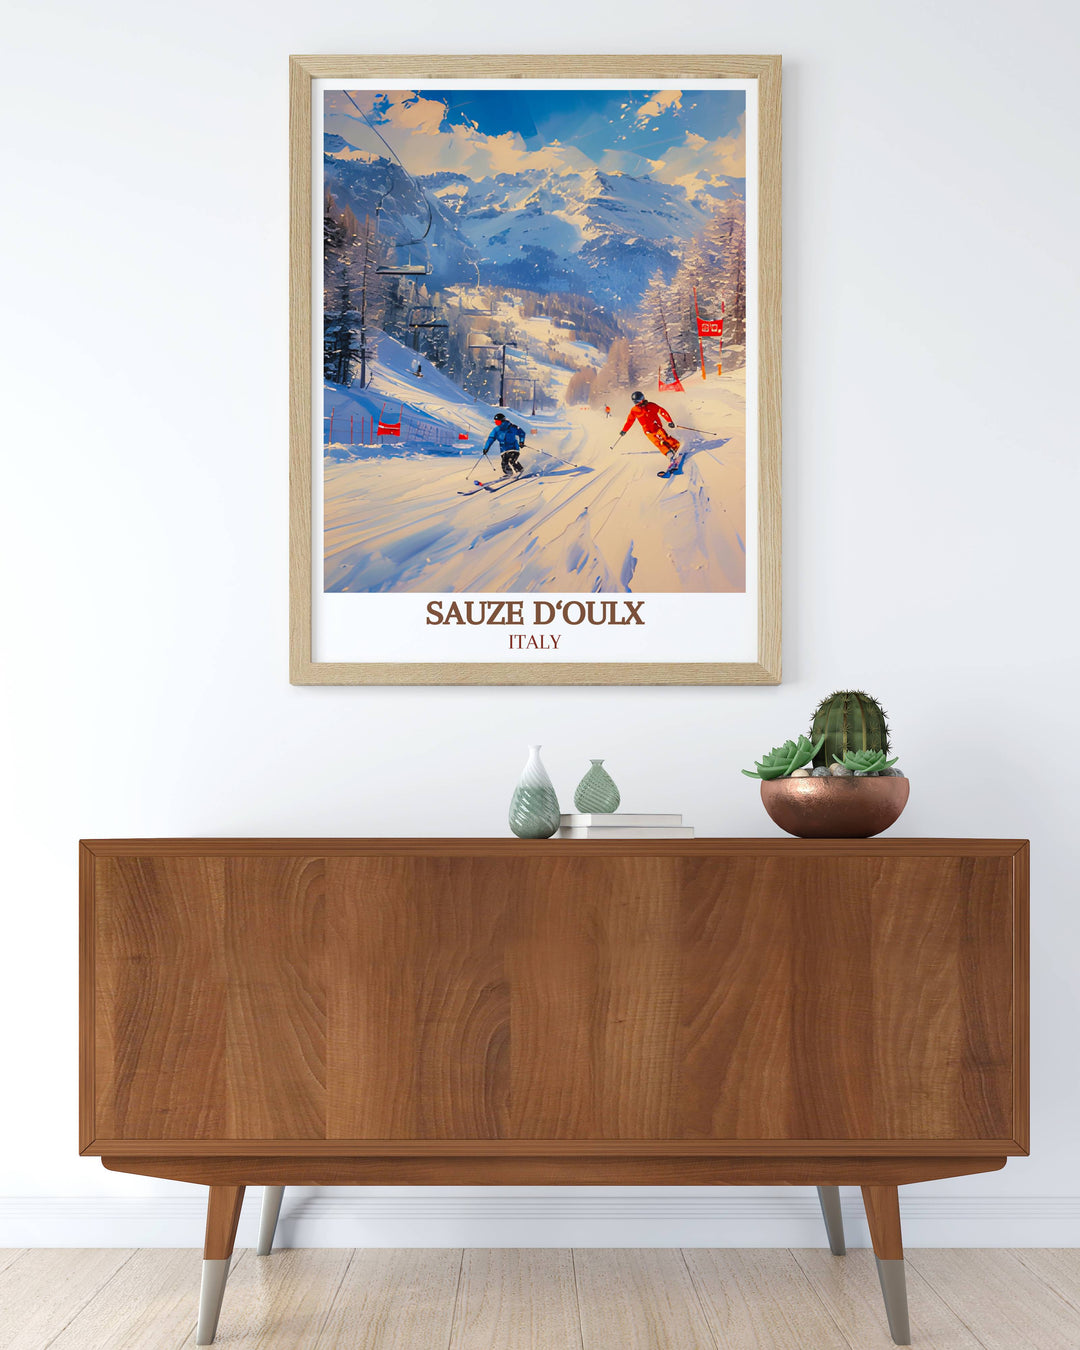 Uncover the adventure of Sauze dOulx with our Custom Prints, capturing the essence of this premier ski destination in beautiful detail.